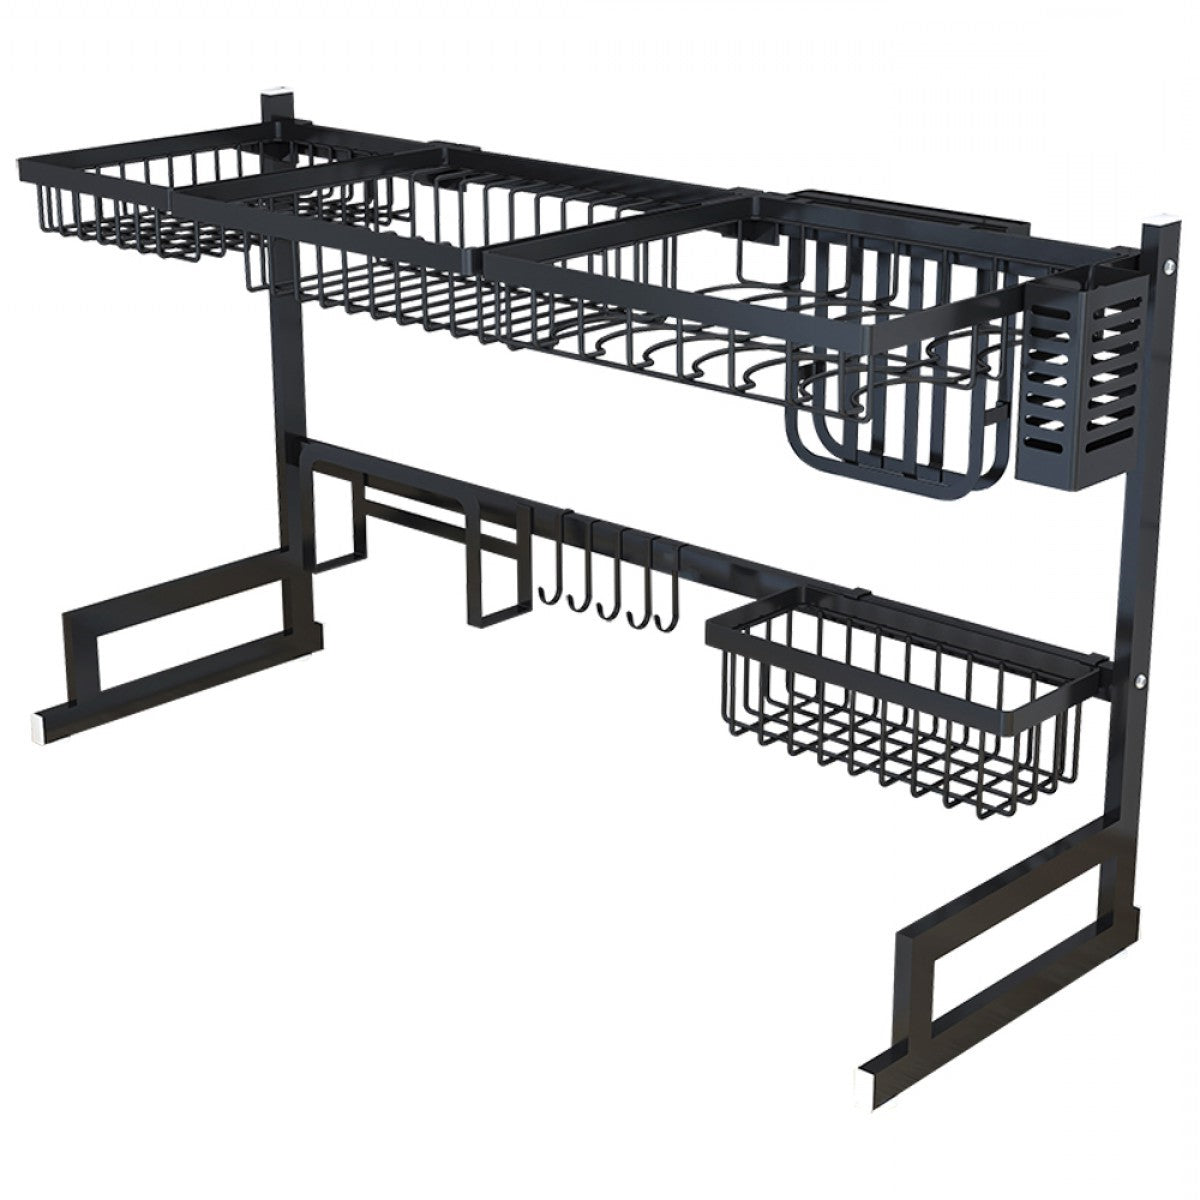 34.6" Stainless Steel Black Dish Drying Rack Over Kitchen Sink, Dishes and Utensils Draining Shelf